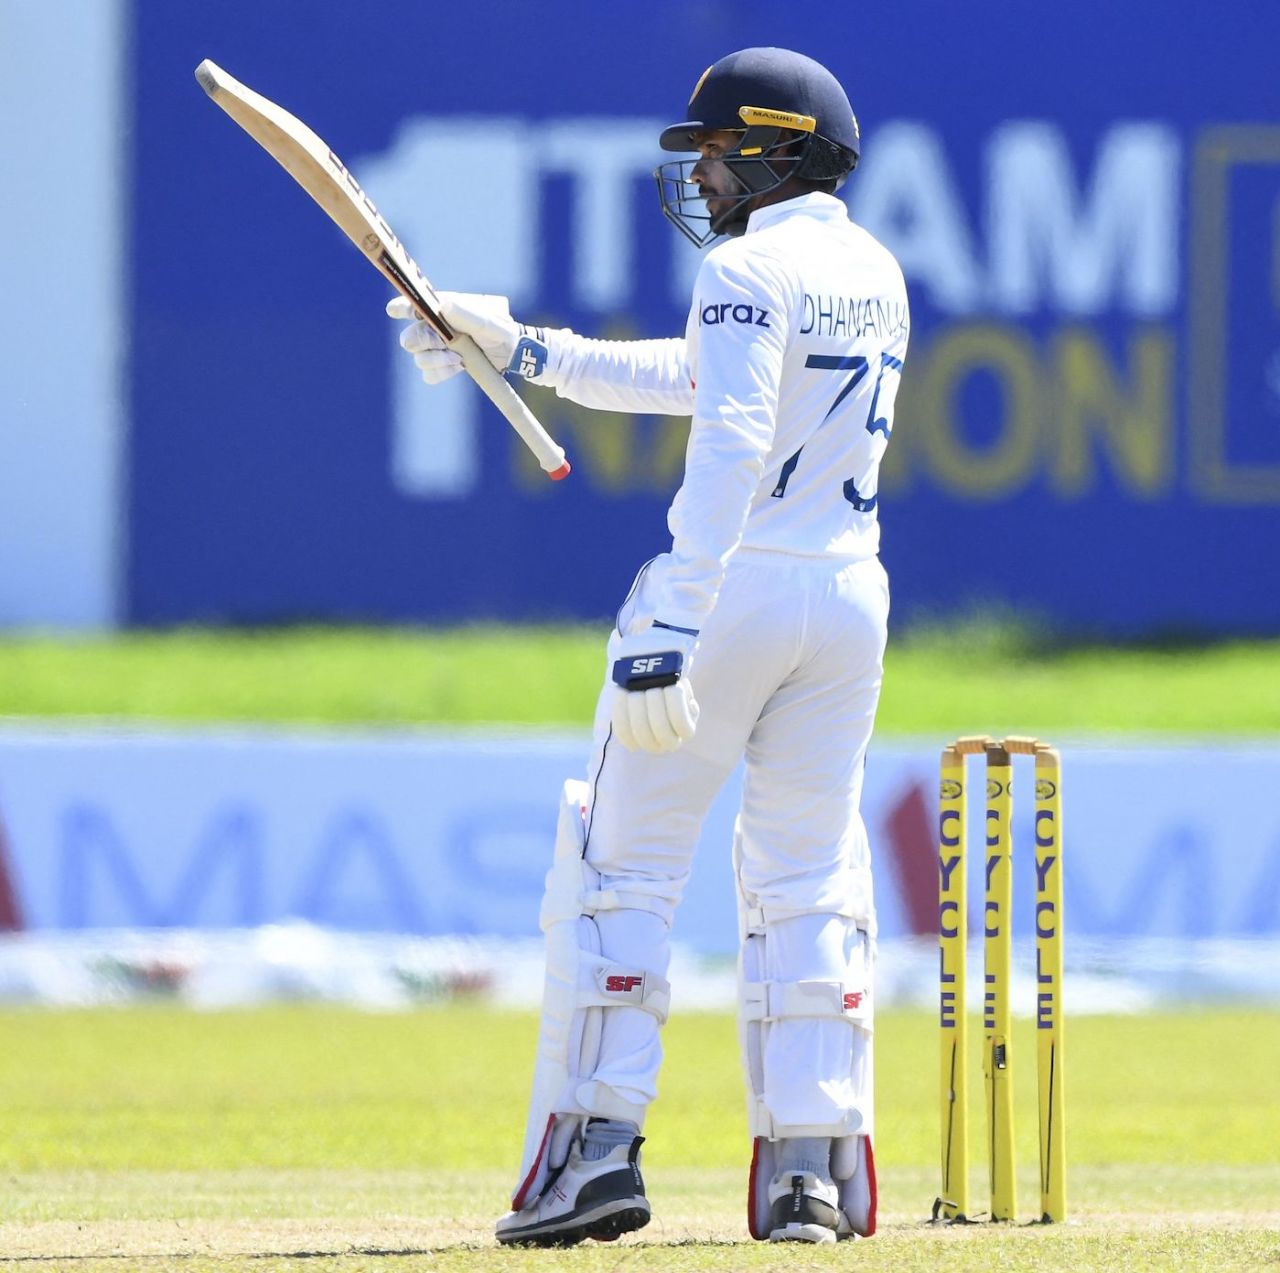 Dhananjaya de Silva acknowledges the cheers after getting to a half-century, Sri Lanka vs West Indies, 2nd Test, Galle, 4th day, December 2, 2021